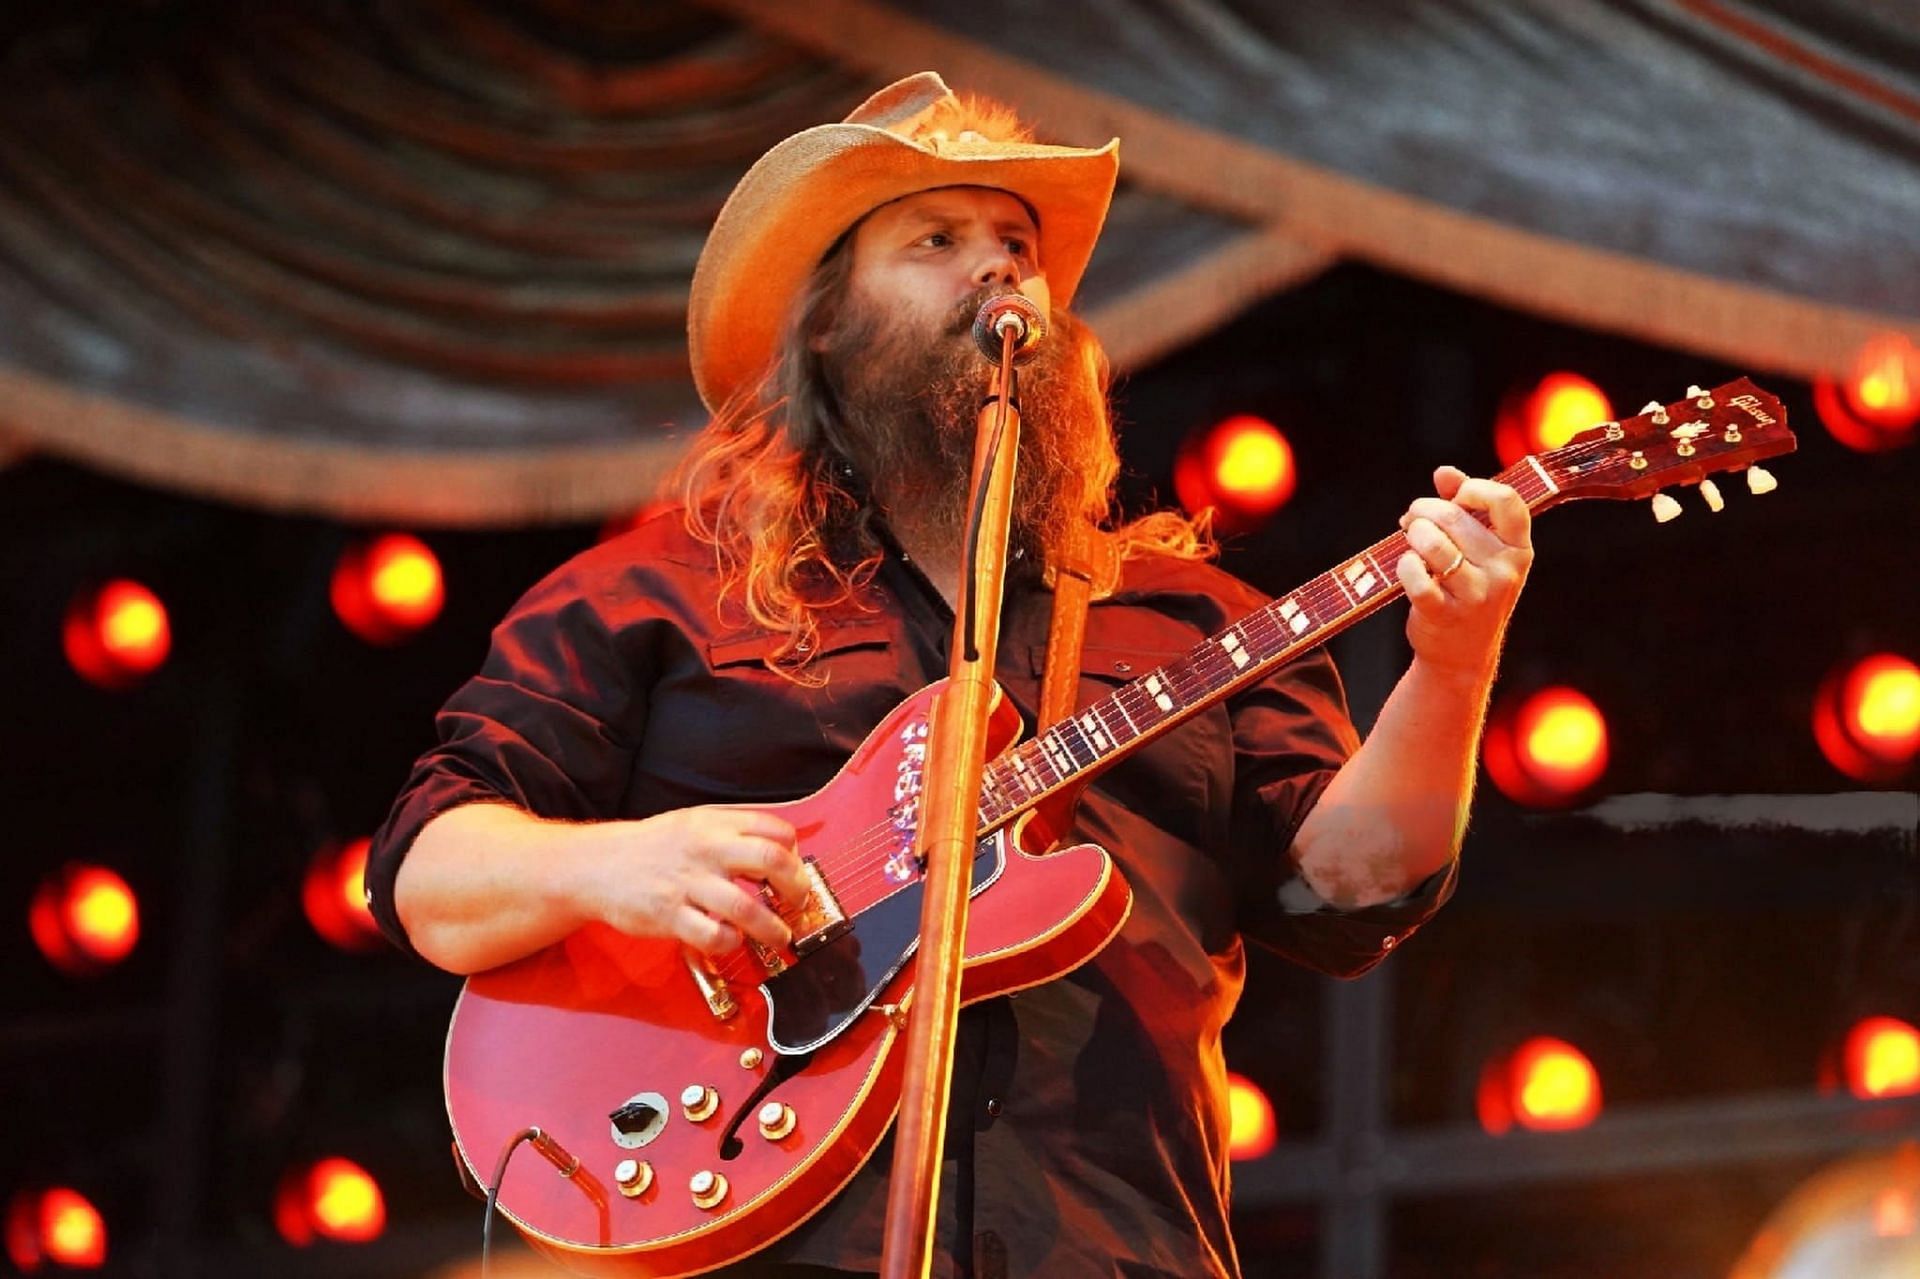 Chris Stapleton performing at the Pilgrimage Music and Cultural Festival, 2022 (Image via Getty)